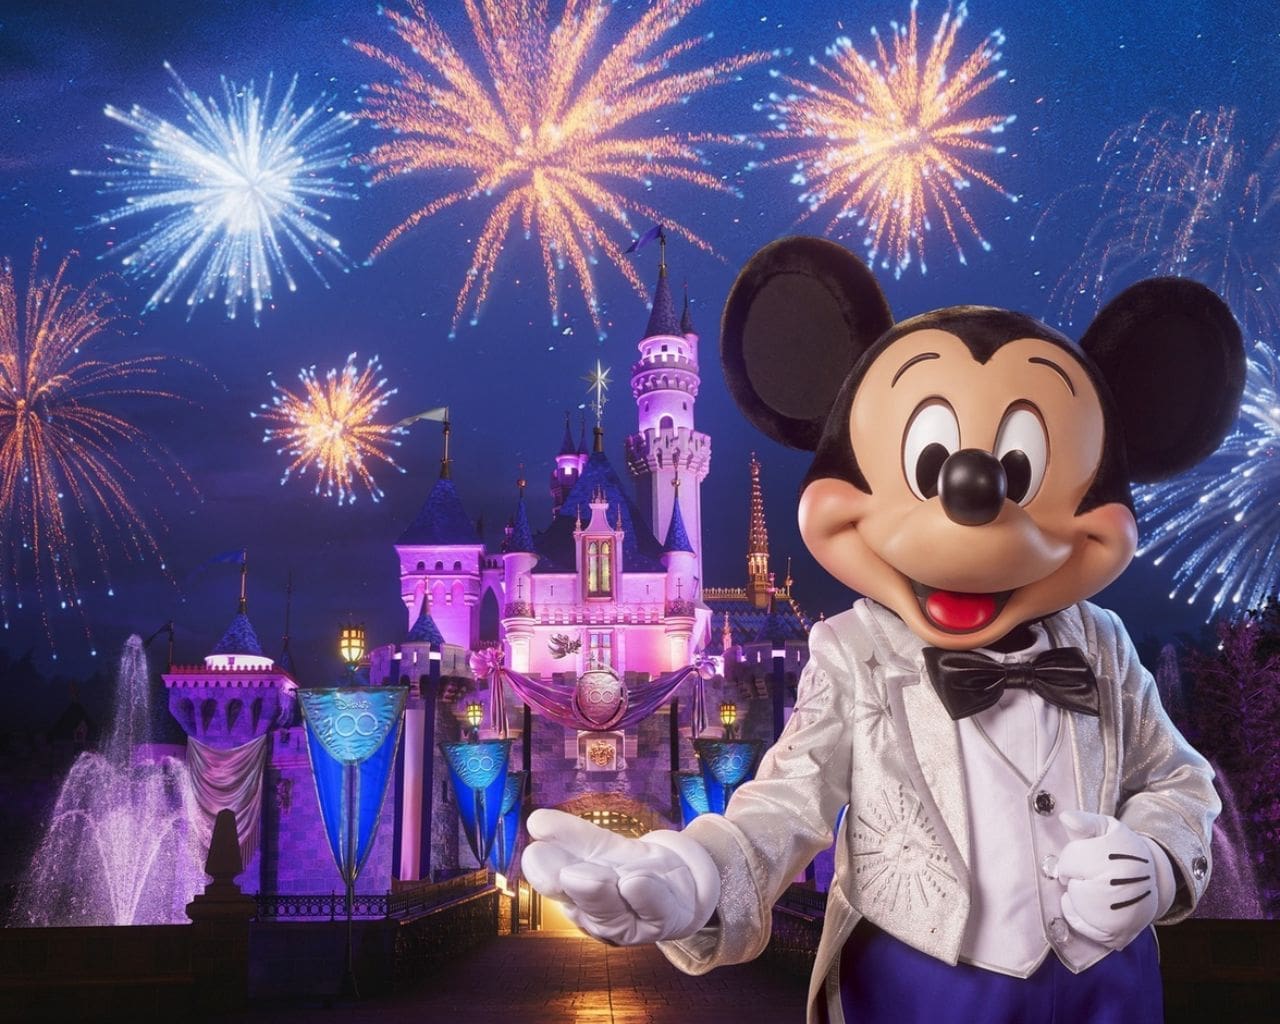 4 Reasons Why Disneyland Is The Happiest Place on Earth